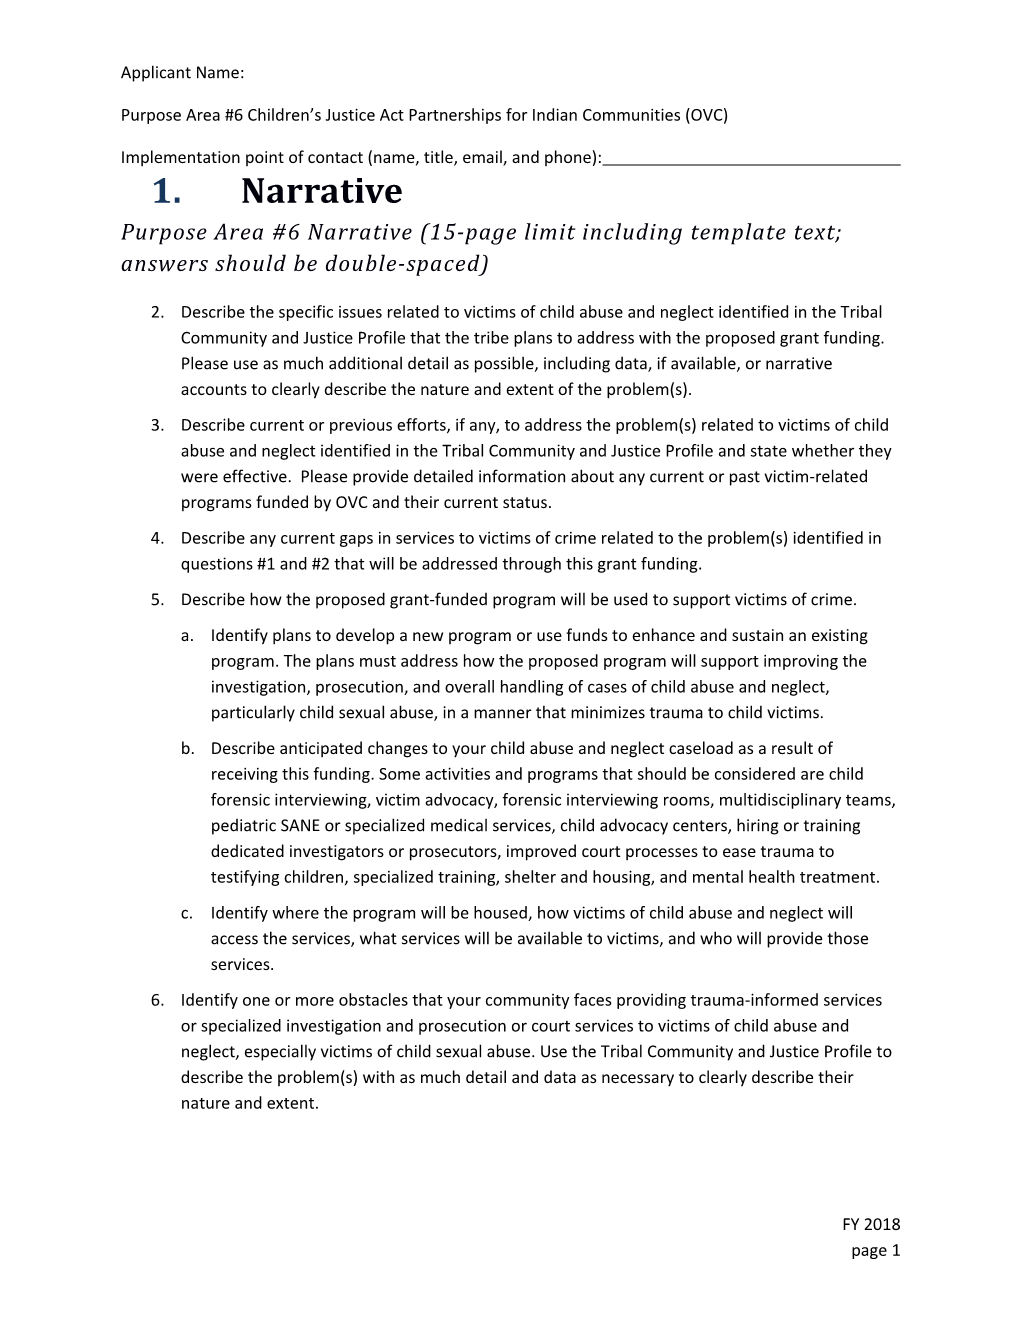 CTAS 2018 Purpose Area 6: OVC Childrens Justice Act Narrative Template